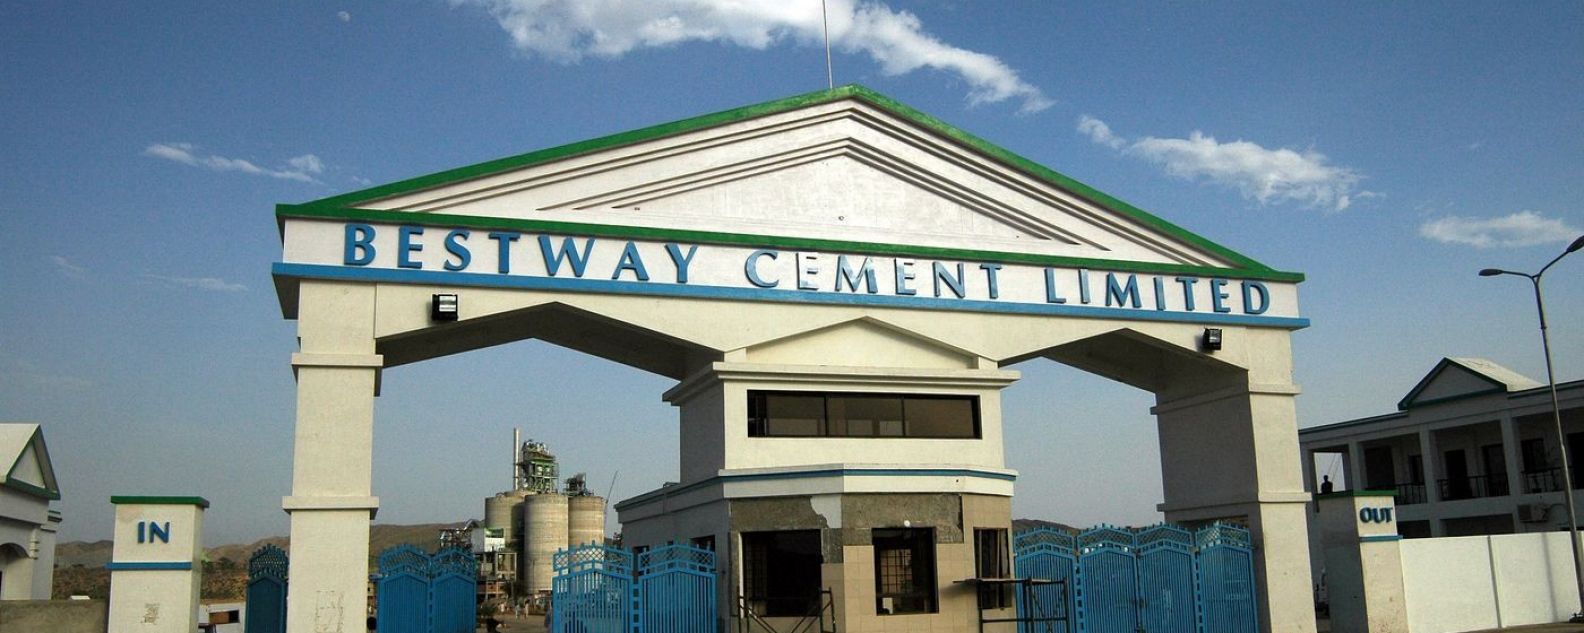 Bestway Cement Limited cement manufacturing plant